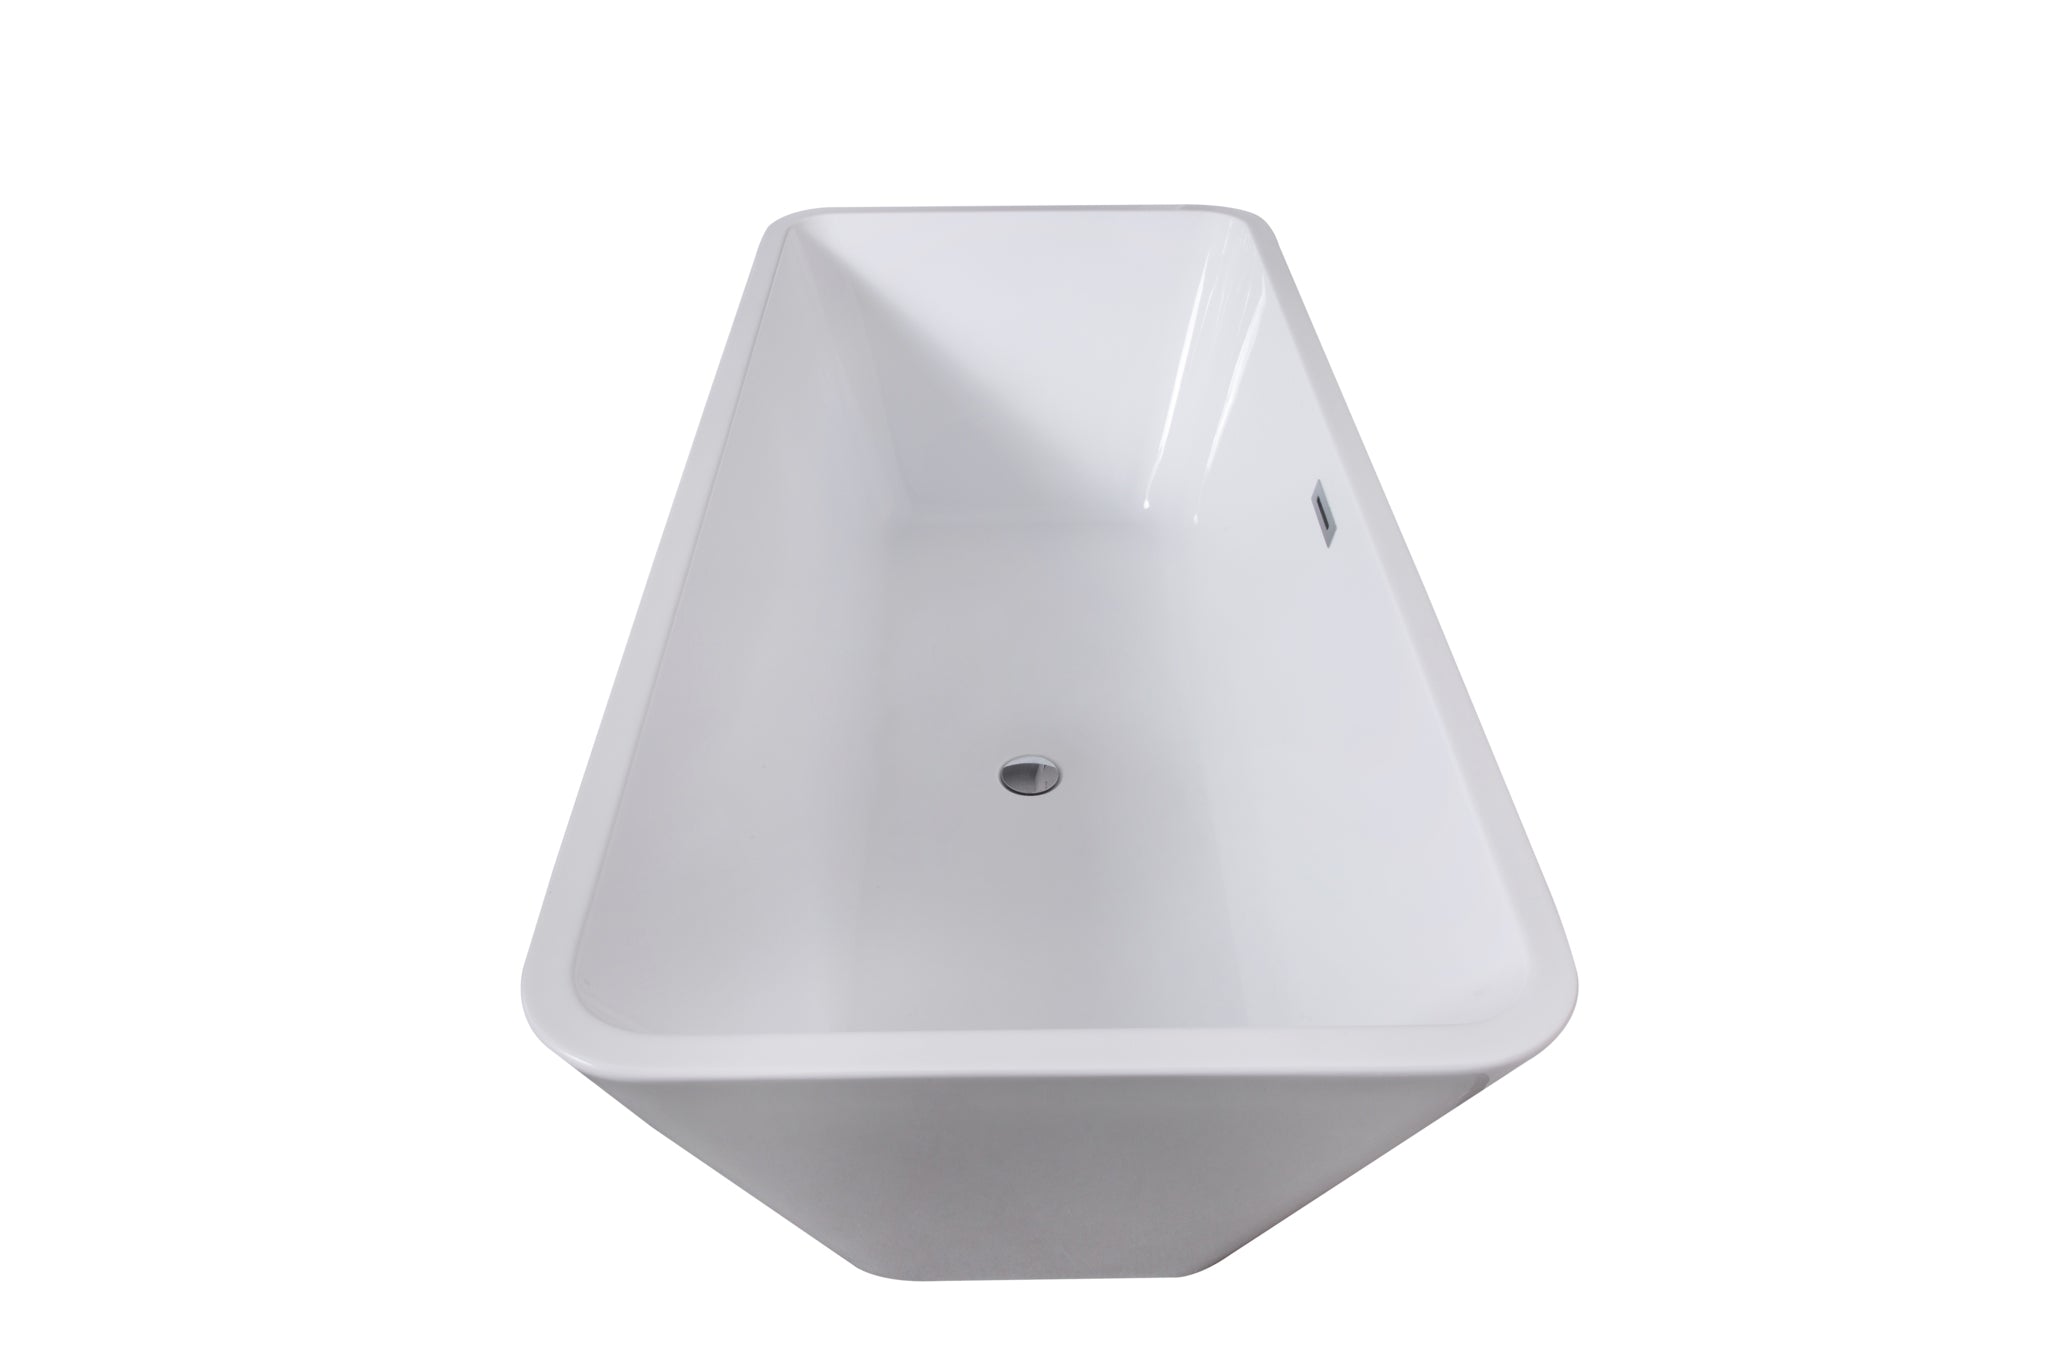 Harmony Bath Tub 59 White Acrylic Free Standing Soaker, Center Drain And Overflow